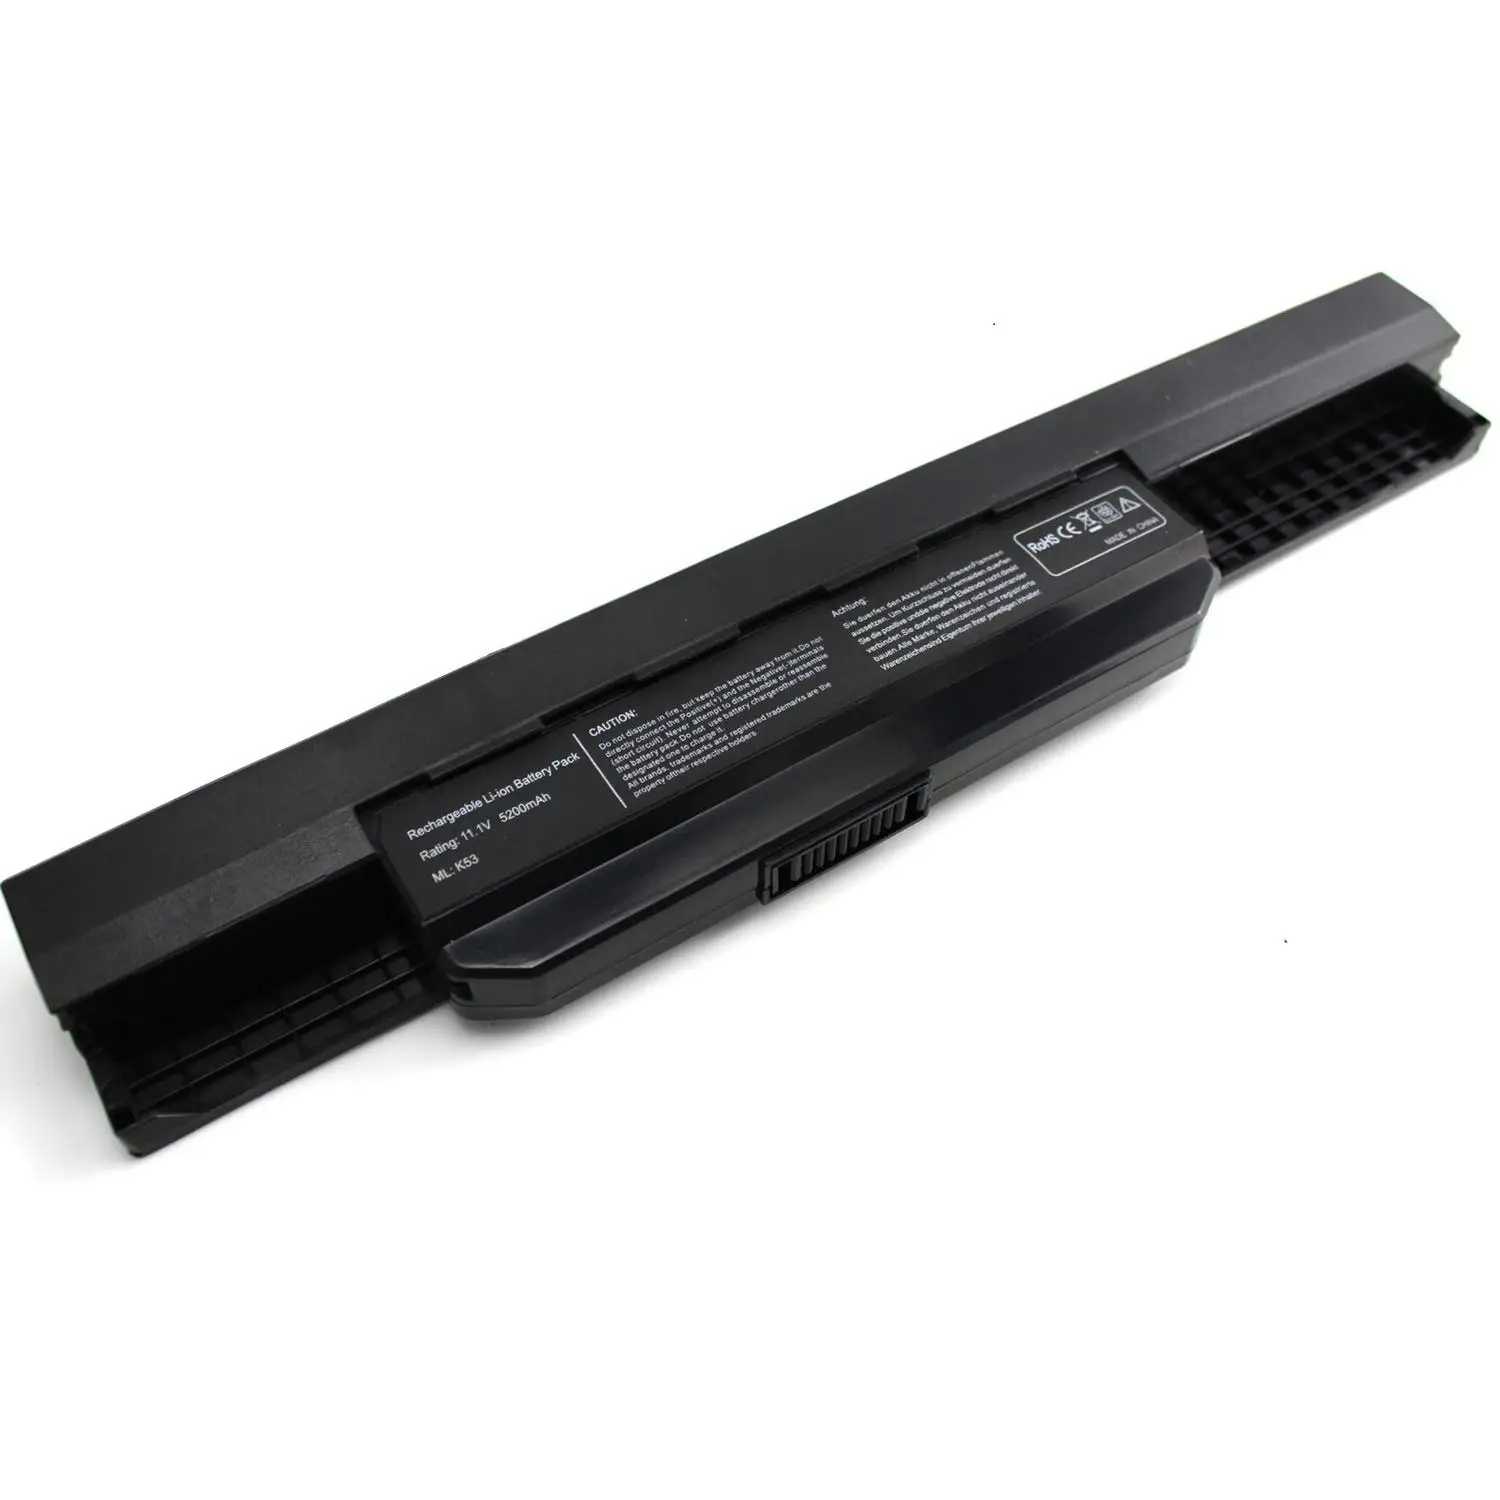 Asus battery pack a32. ASUS li-ion Battery Pack a32-k53. ASUS a32-k53 a41-k53 a42-k53 6 - 4400mah. Асус li-lon Battery Pack a32-n 55 rating:+10.8v 5200ah 56wh. Li-ion Battery Pack для ASUS k72d.